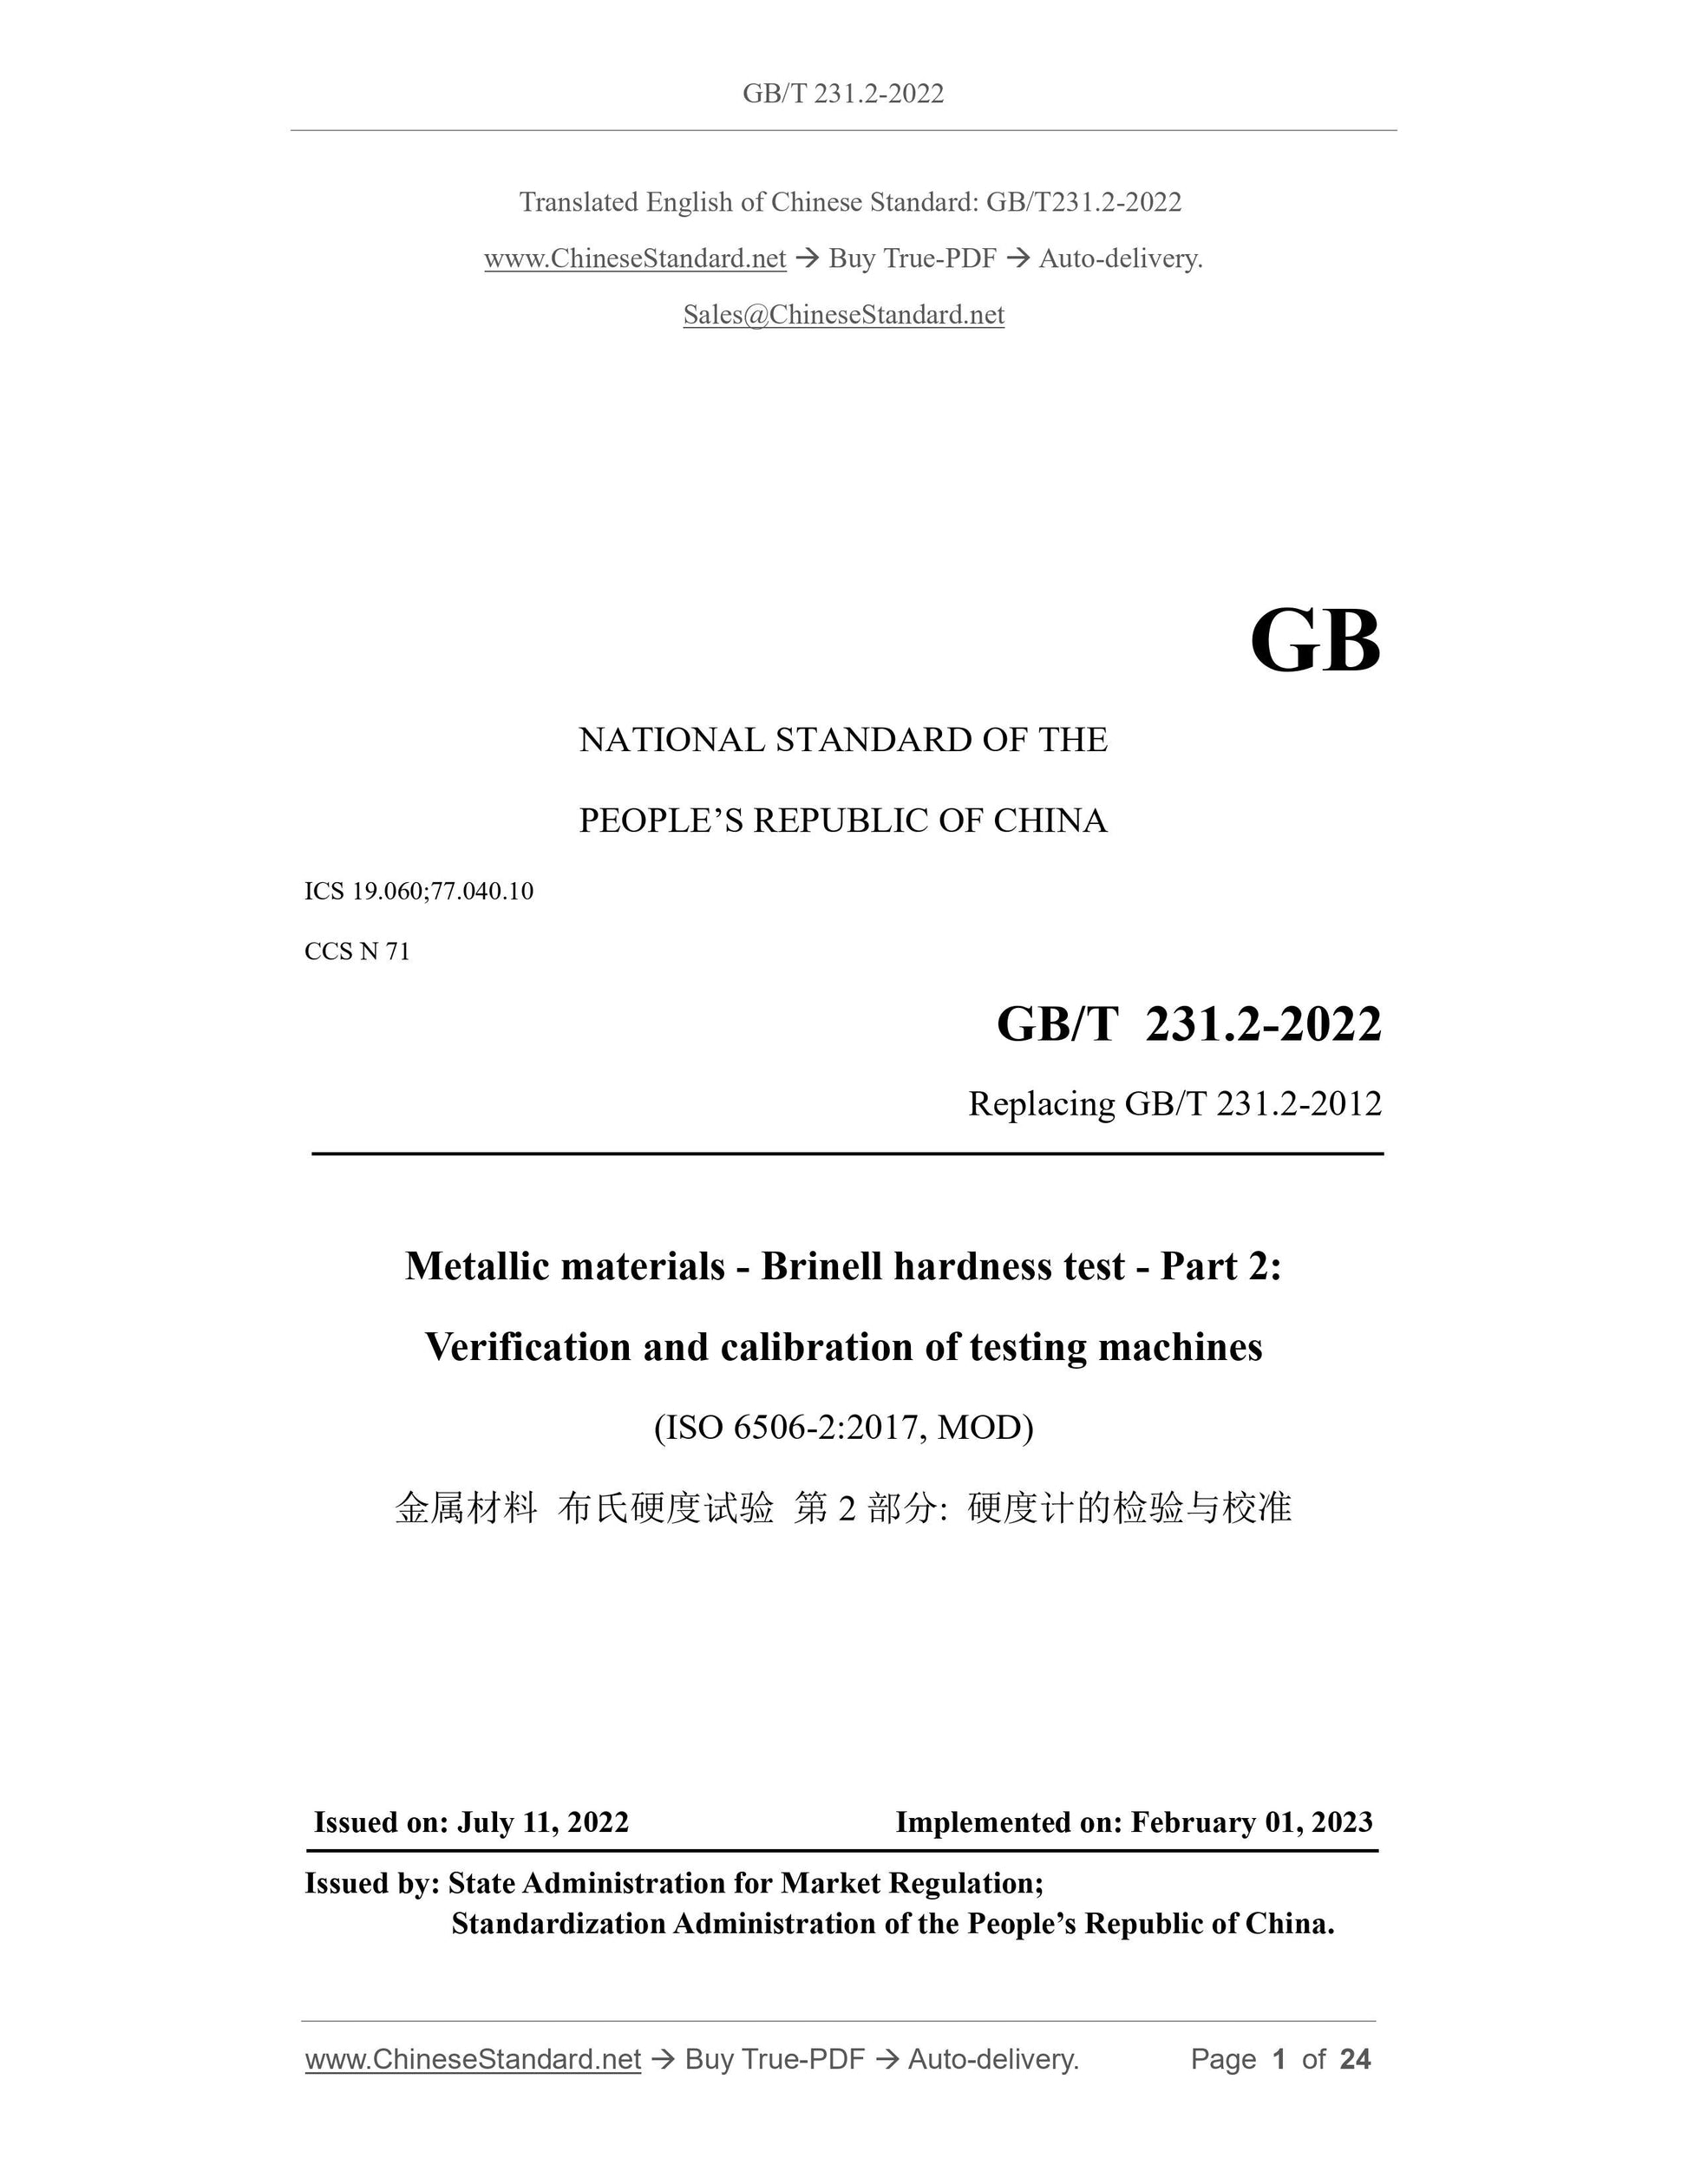 GB/T 231.2-2022 Page 1